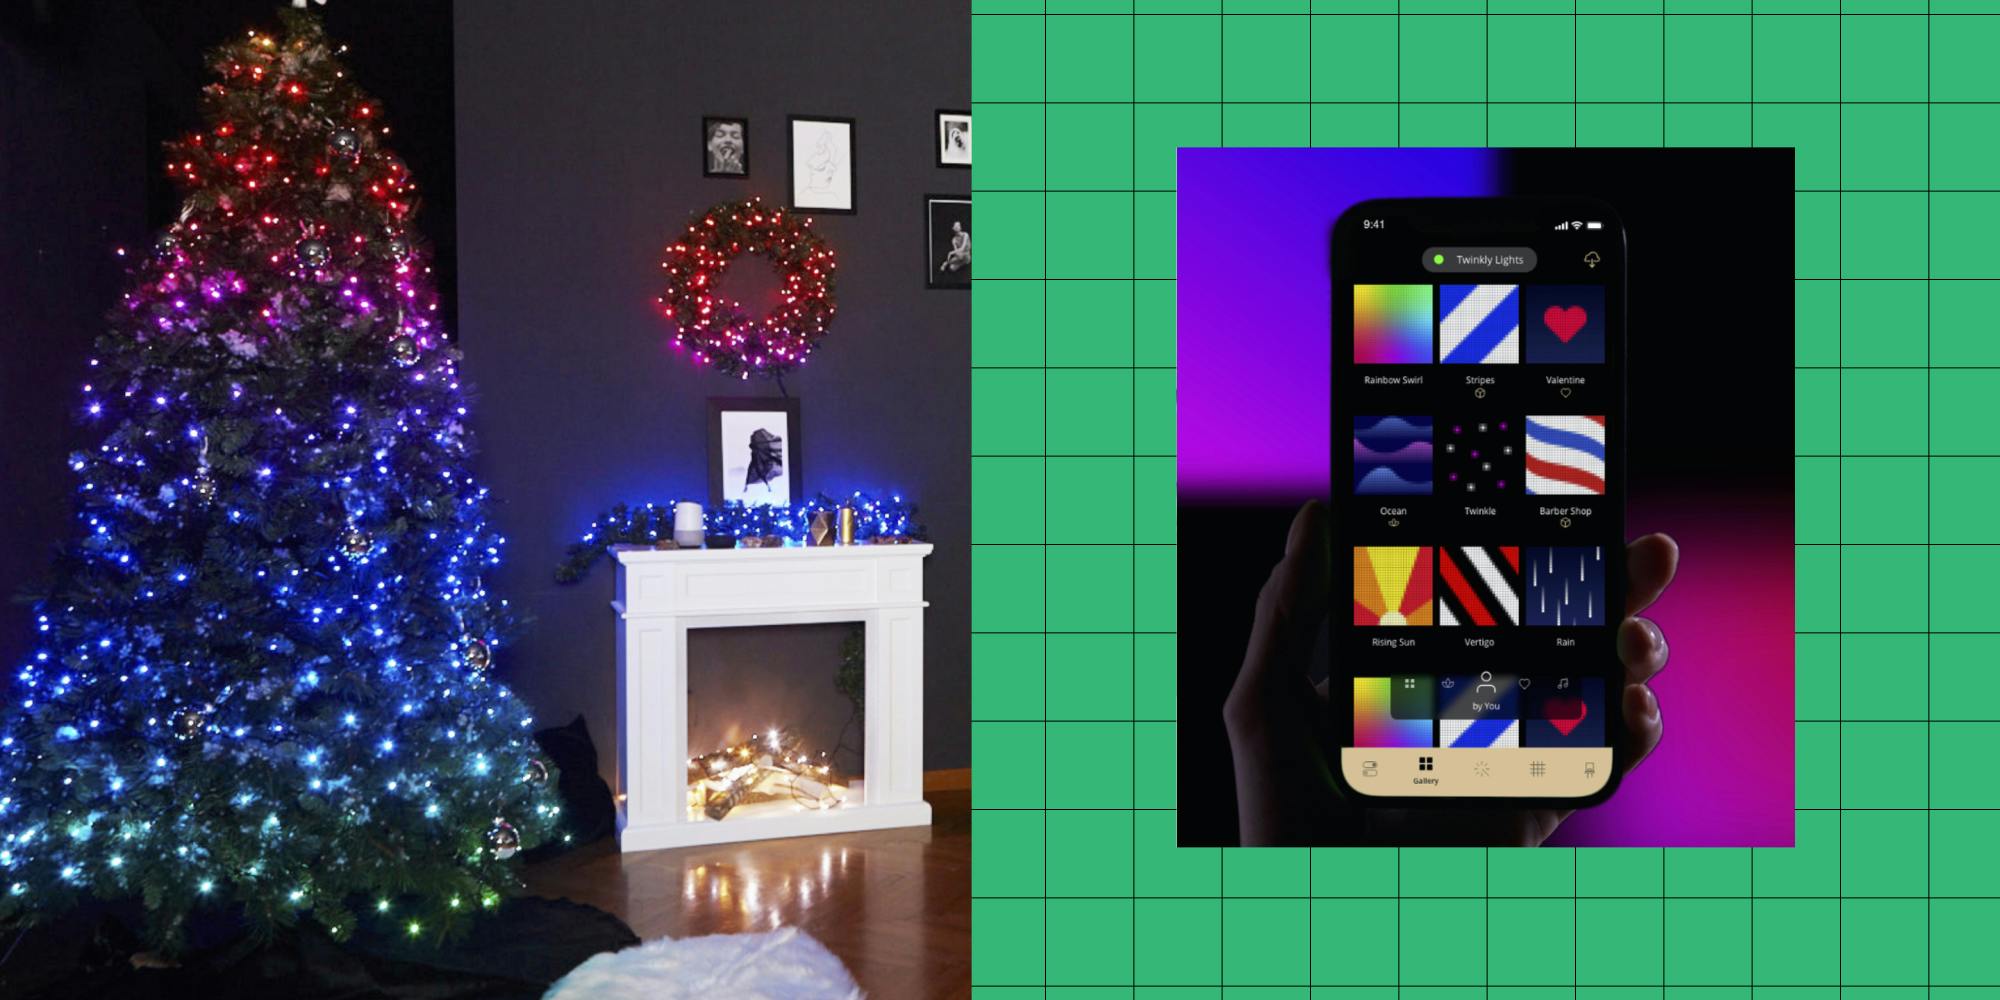 How to control Christmas lights using your smartphone